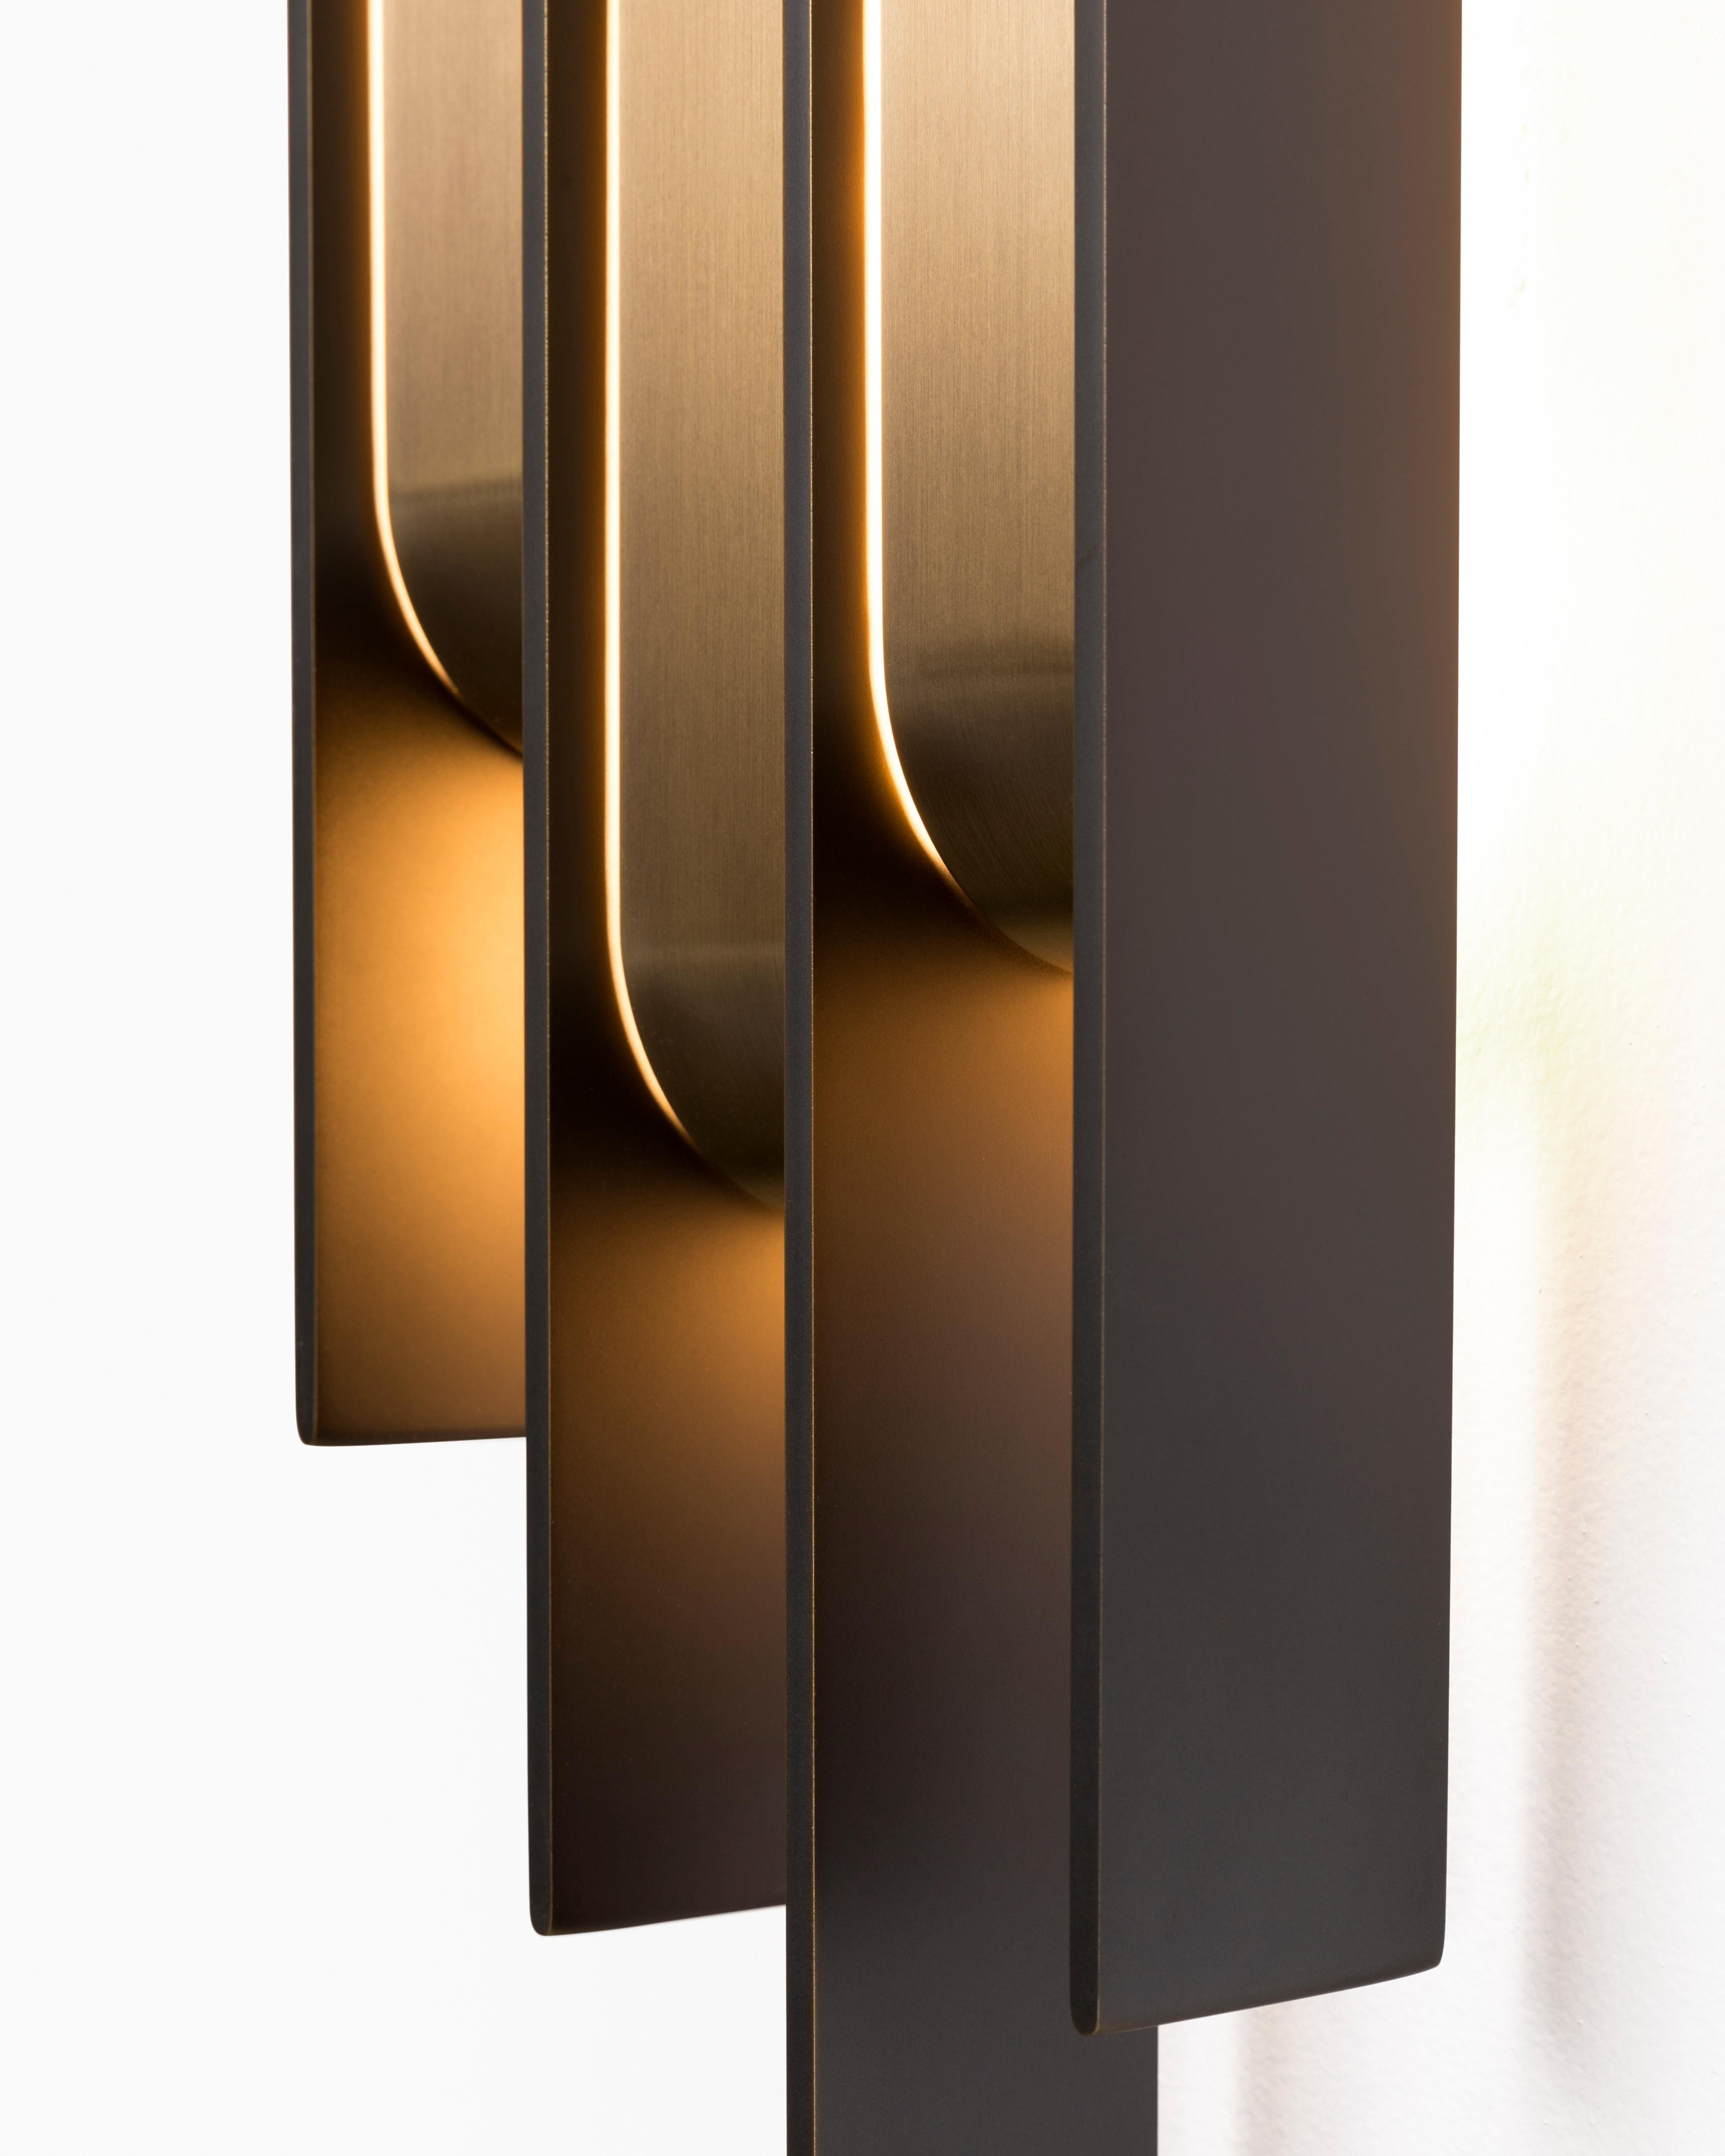 Modern HOLLY HUNT Meridian Sconce in Metal Golden Bronze Patina Finish